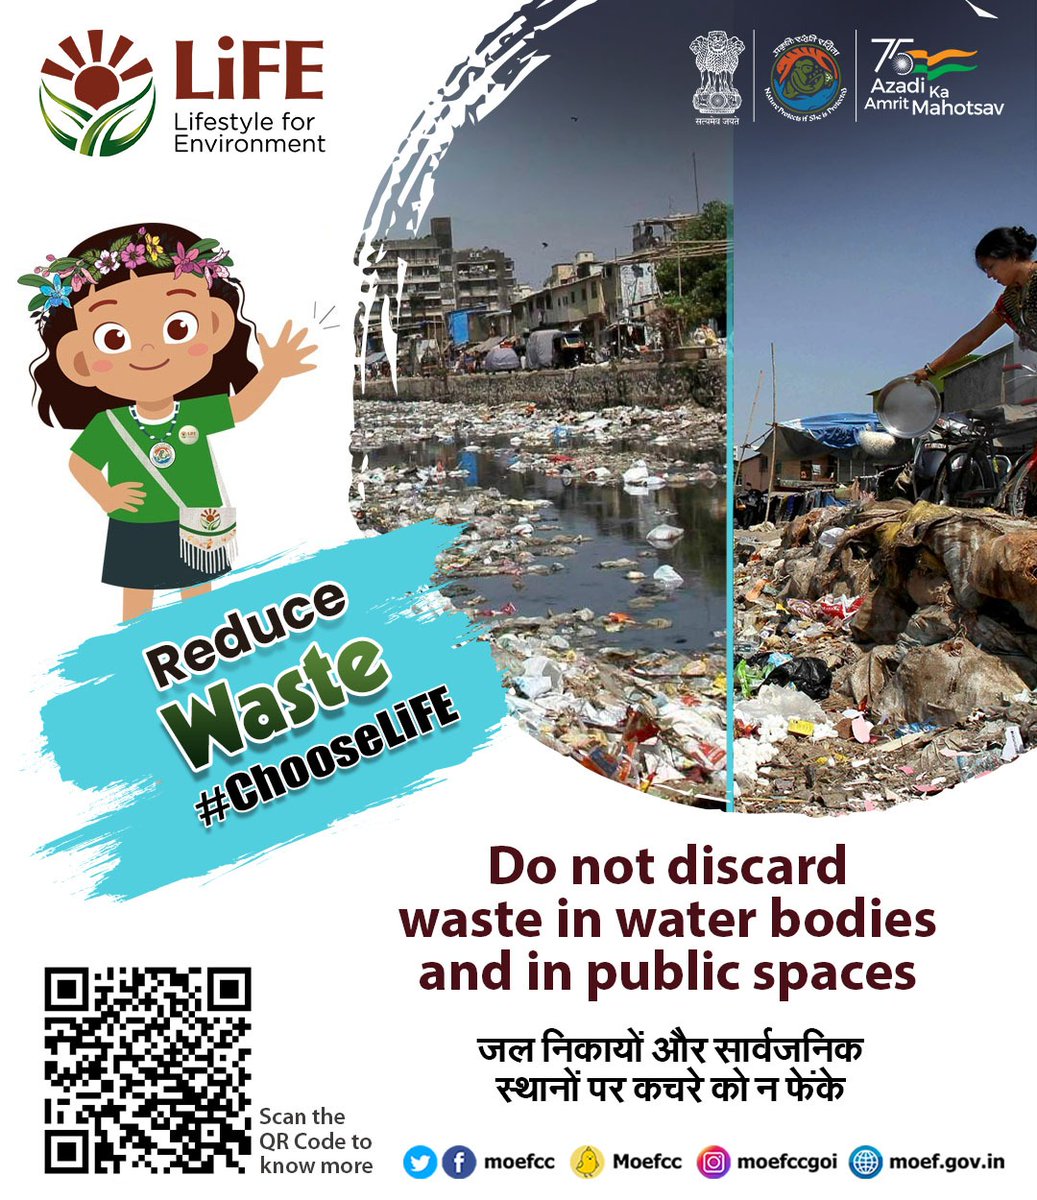 'Do not discard waste in water bodies and public spaces. Keep our environment clean and healthy for everyone' #MissionLiFE #ChooseLiFE